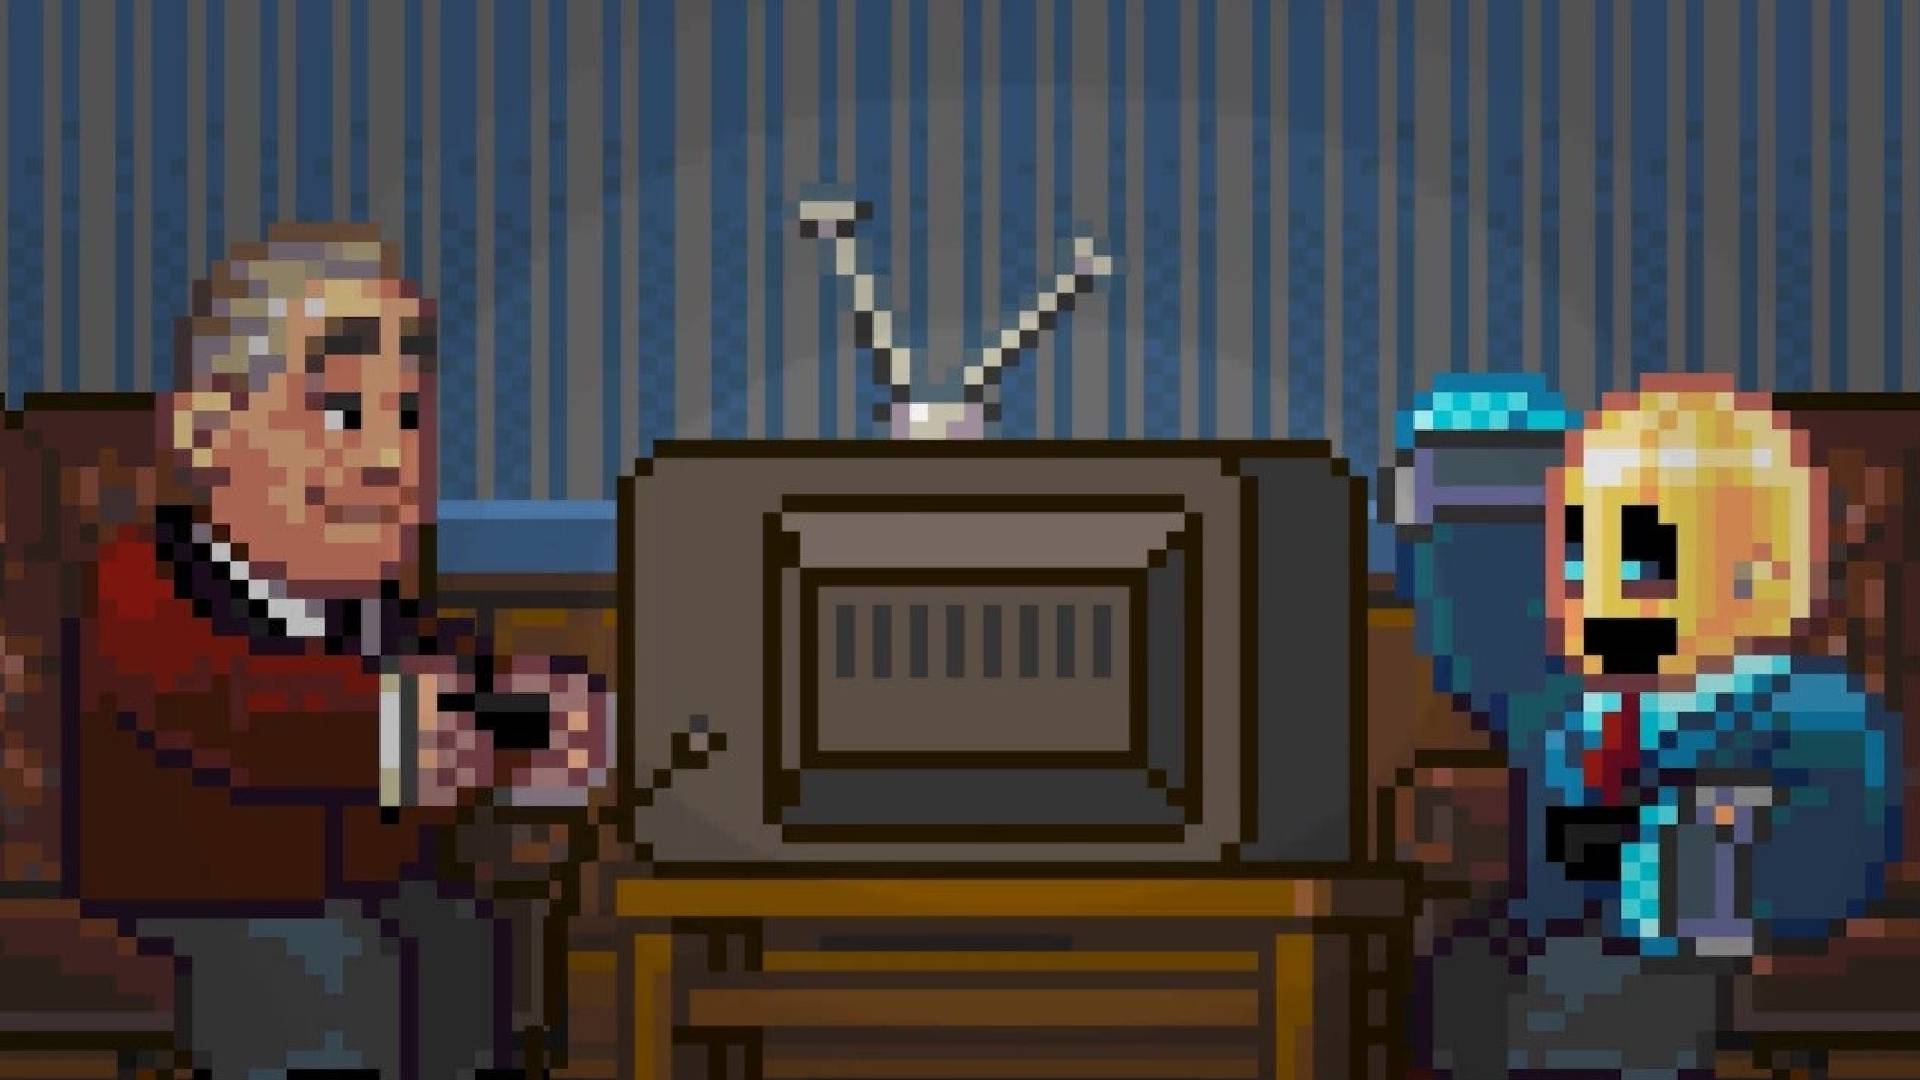 Funny games: A pixelated scene shows a robot wearing a top hat sat with a man in a robe, playign video games